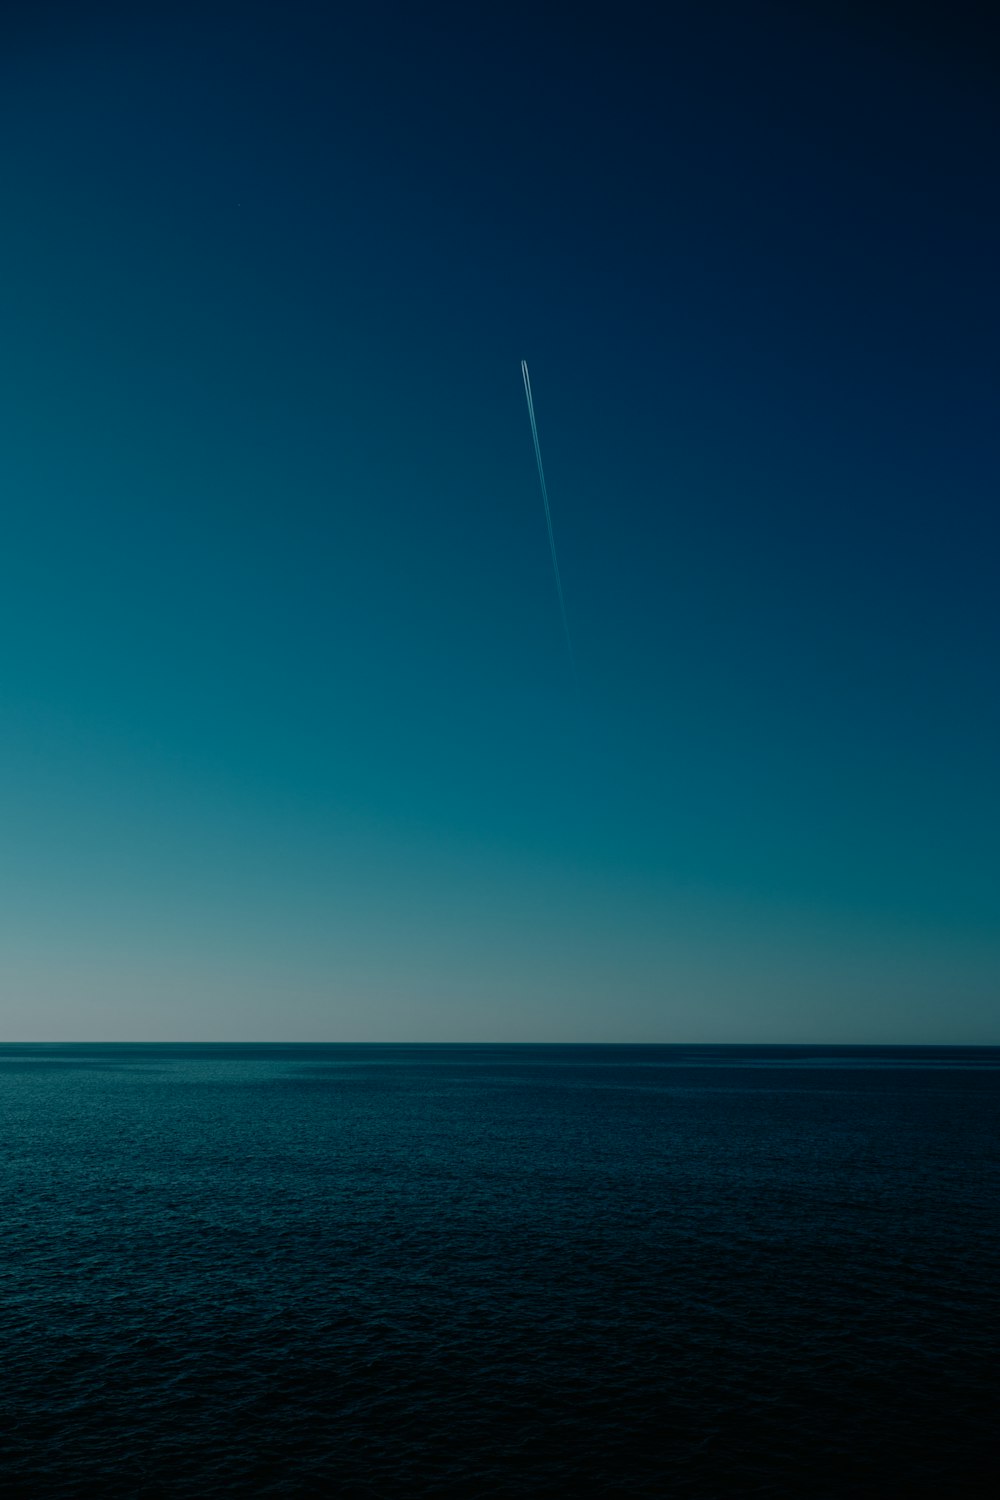 an airplane flying over the ocean on a clear day